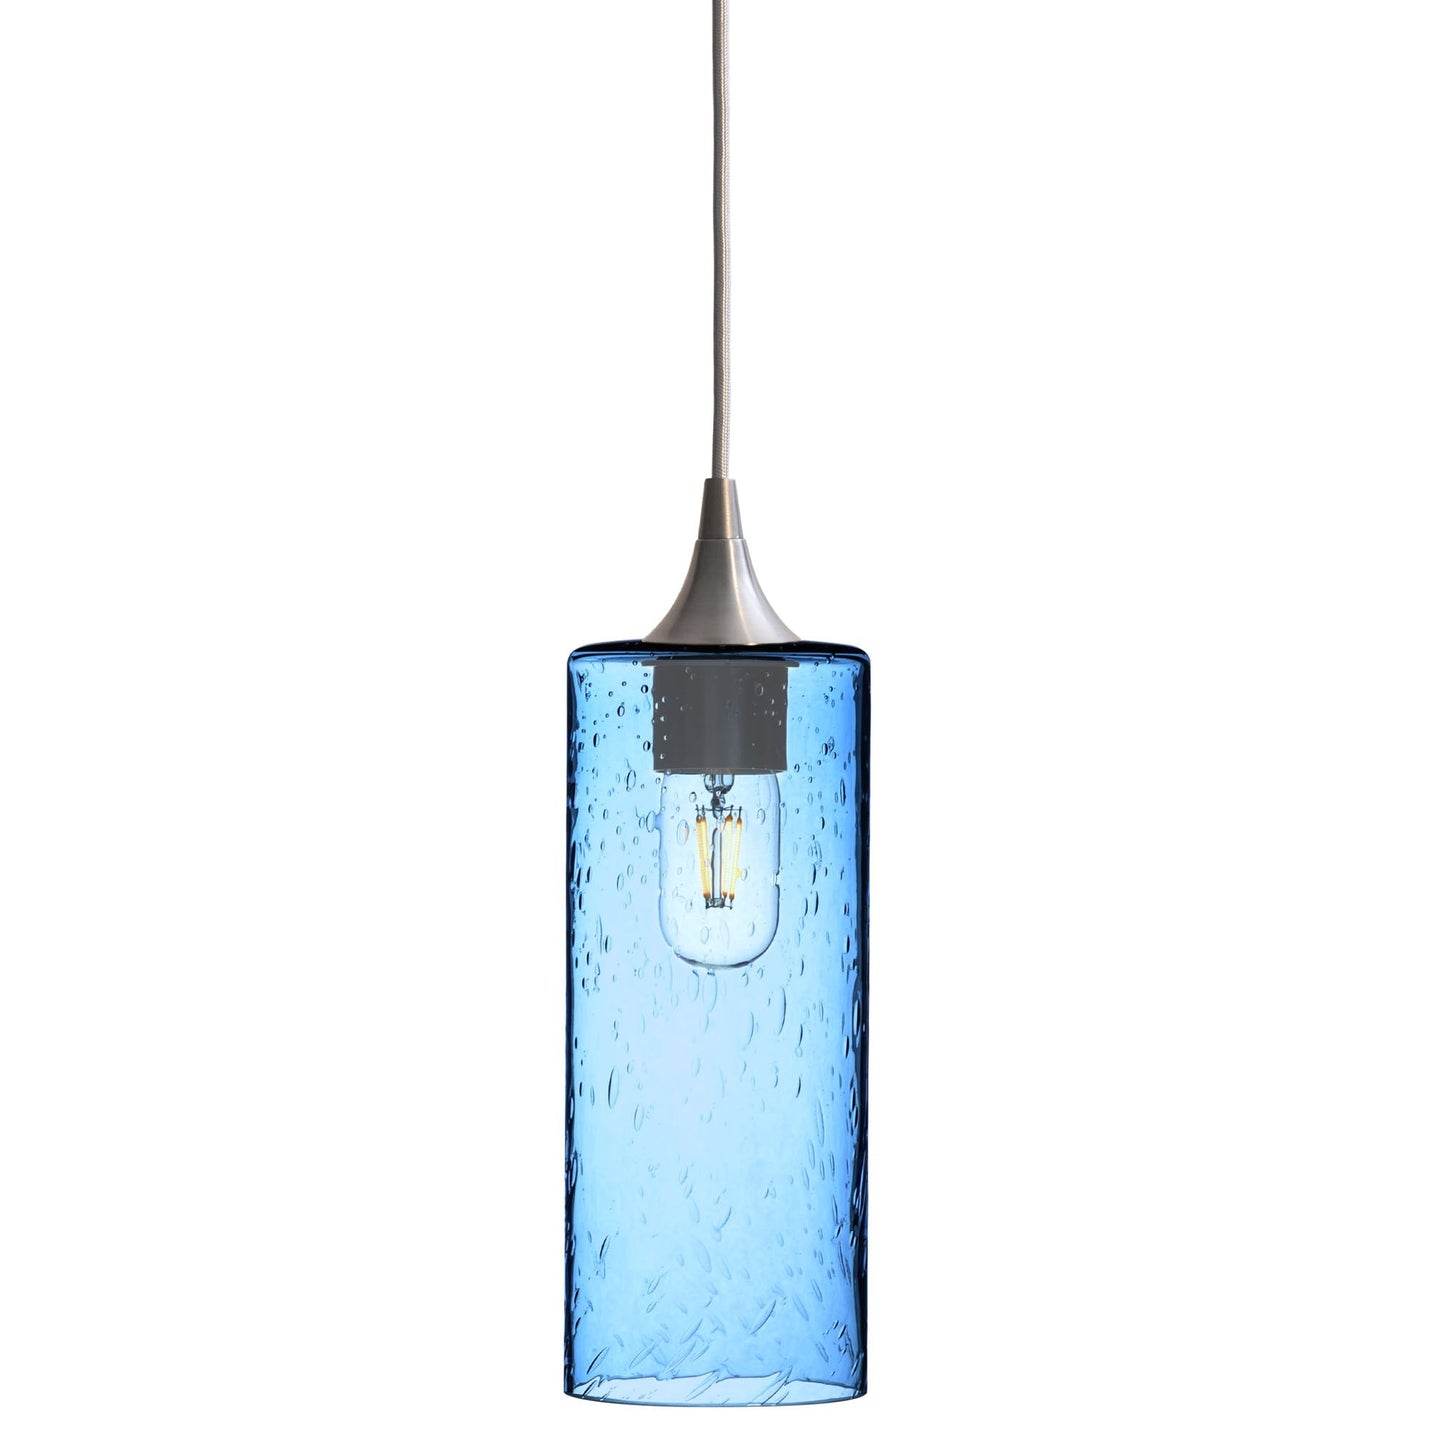 515 Lunar: Single Pendant Light-Glass-Bicycle Glass Co - Hotshop-Steel Blue-Brushed Nickel-Bicycle Glass Co